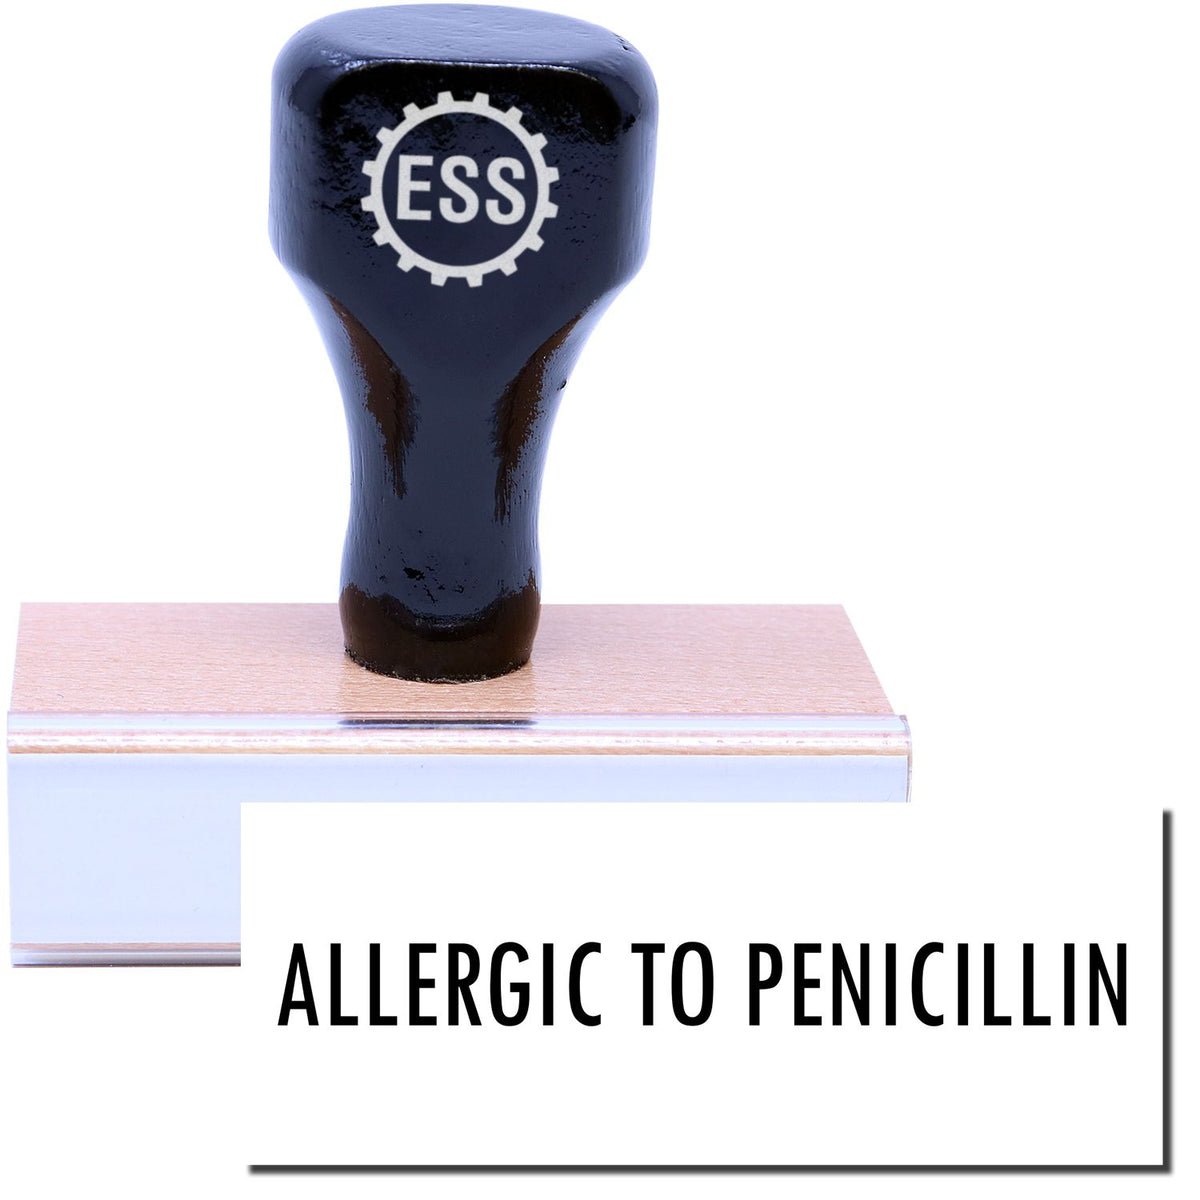 A stock office rubber stamp with a stamped image showing how the text &quot;ALLERGIC TO PENICILLIN&quot; in a large font is displayed after stamping.